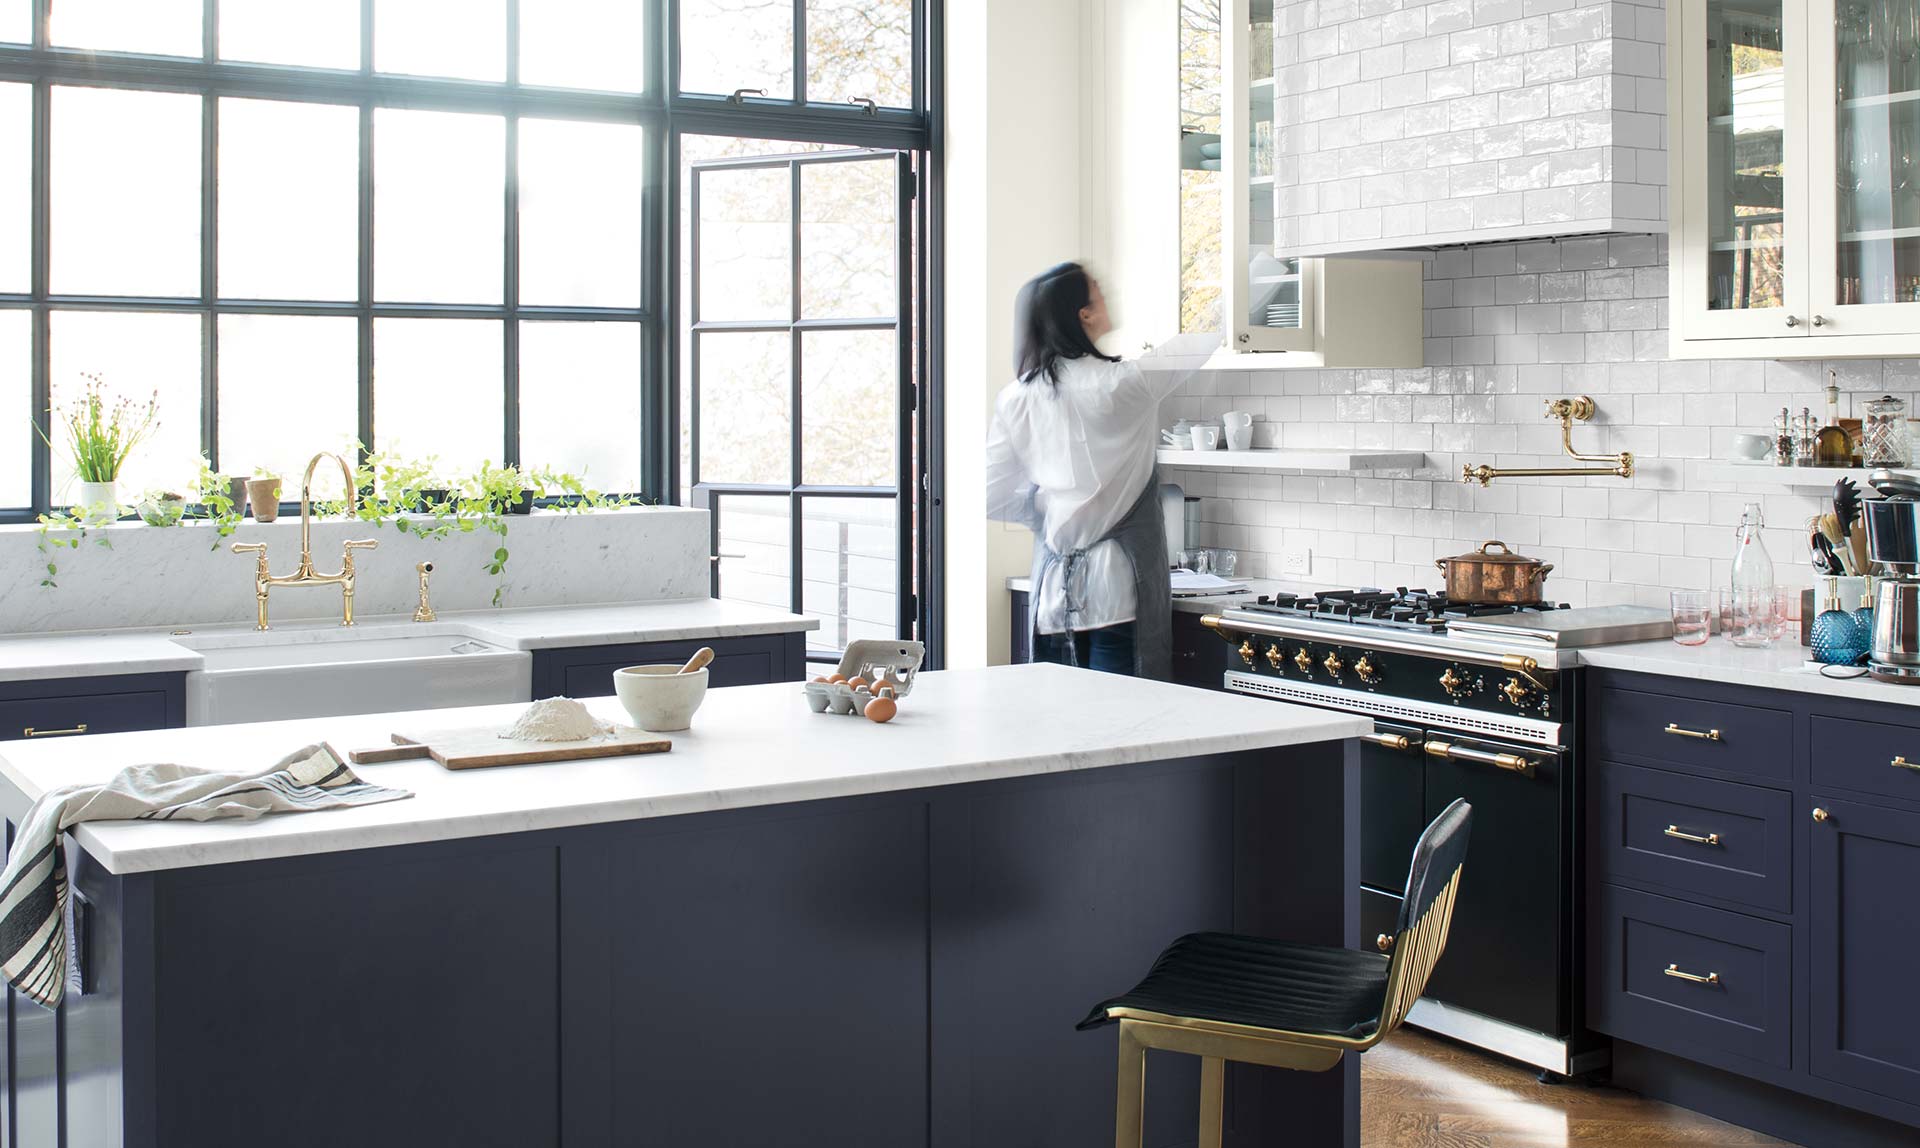 A buyer's guide to kitchen worktops - with lots of fresh ideas - by interior stylist Maxine Brady and lifestyle blogger at welovehomeblog.com